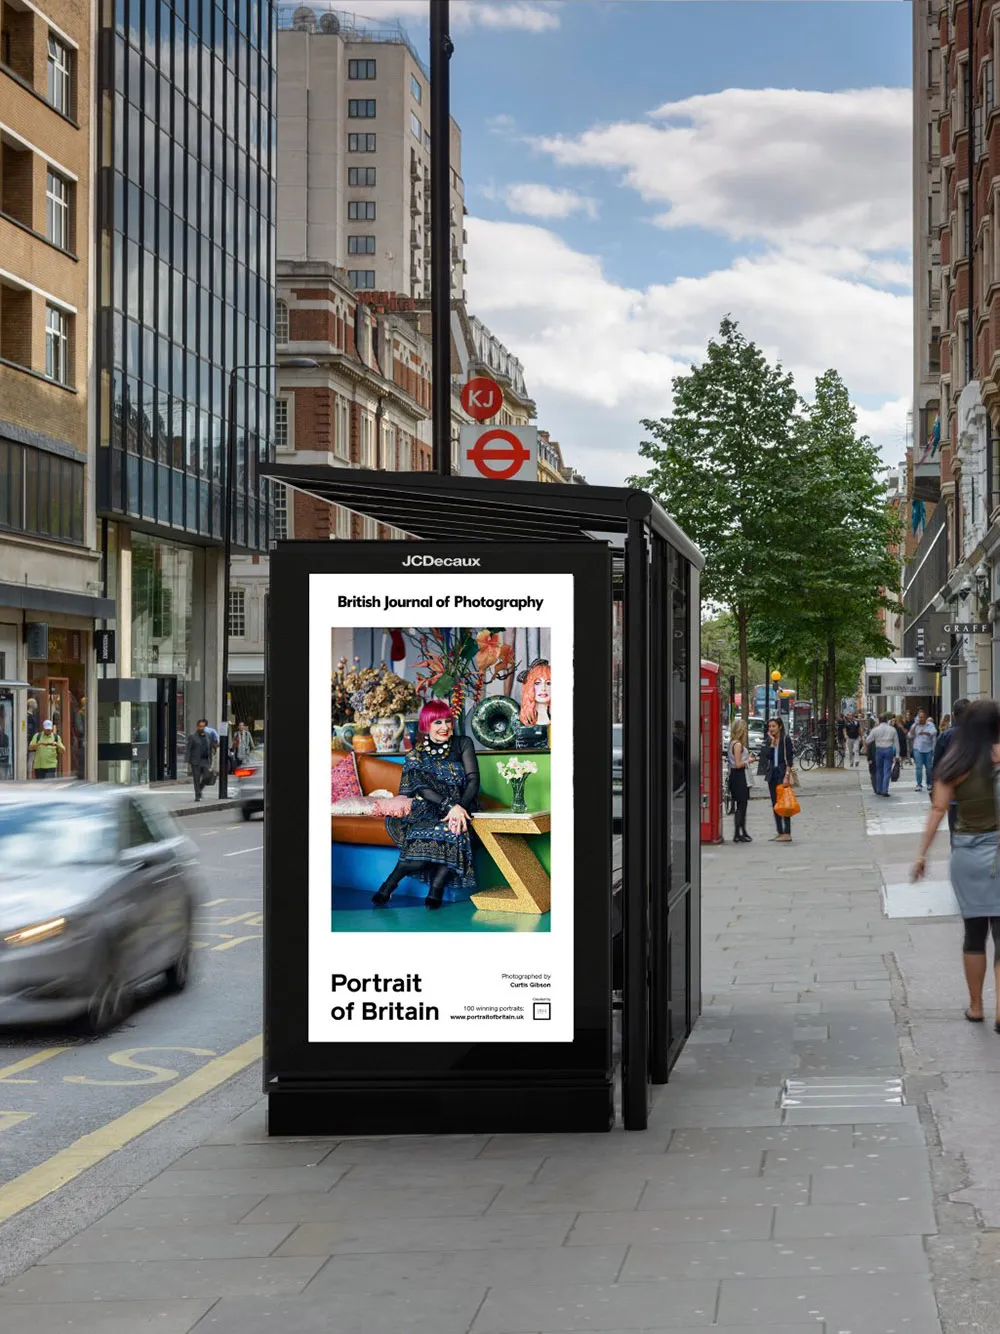 A BoldVu® Display mounted on a London bus shelter